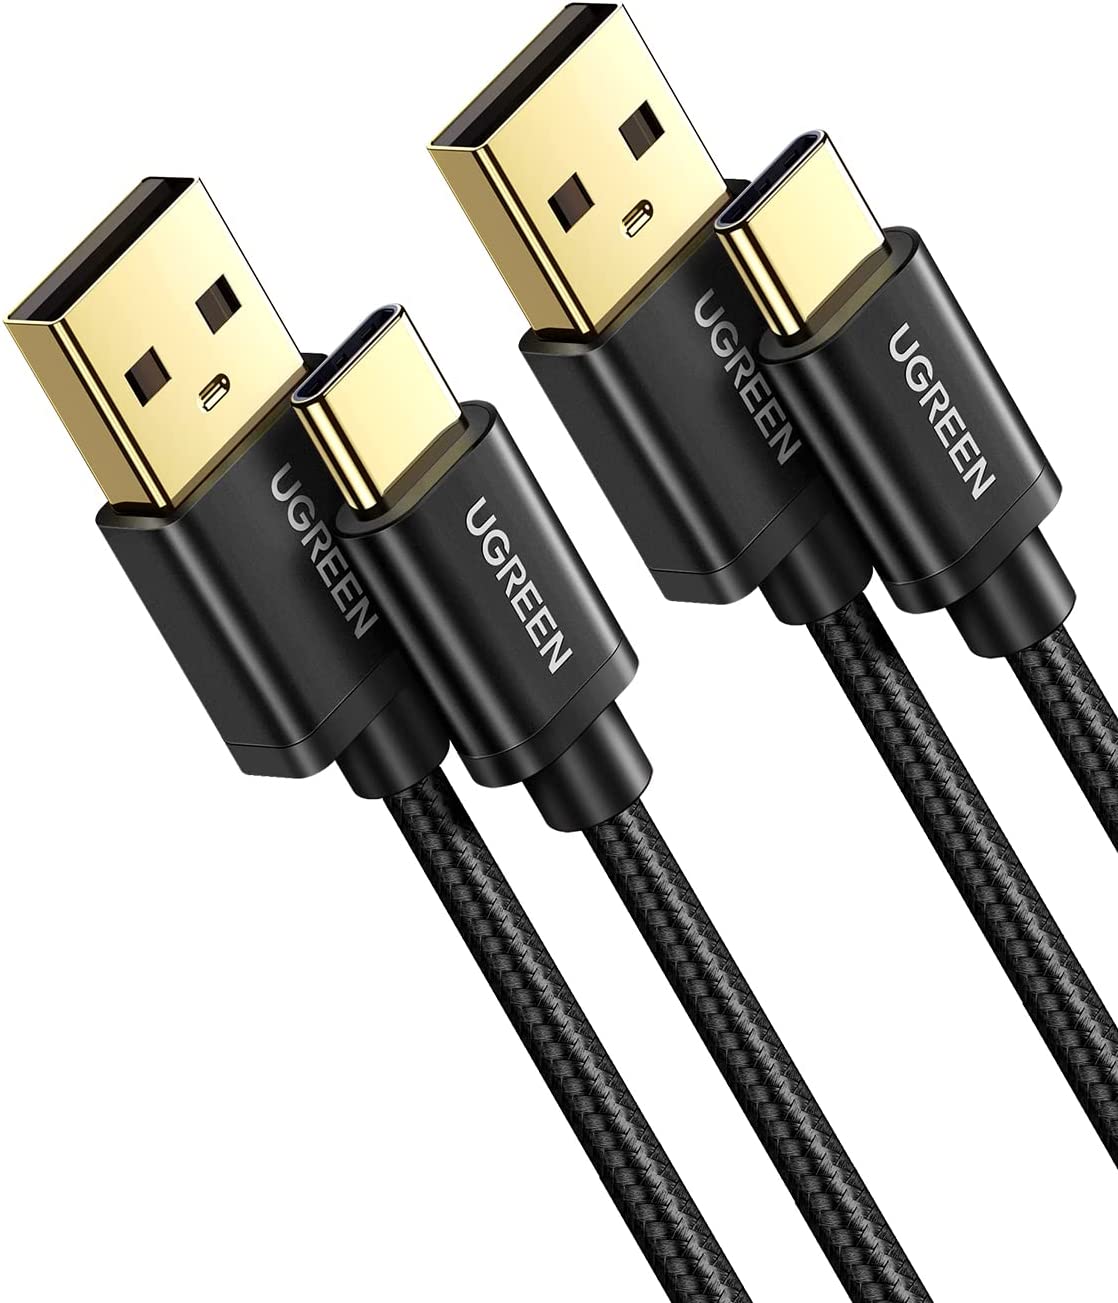 2-Pack 3' UGREEN USB C Cable $6.80 & More + Free Shipping w/ Prime or on Orders $25+